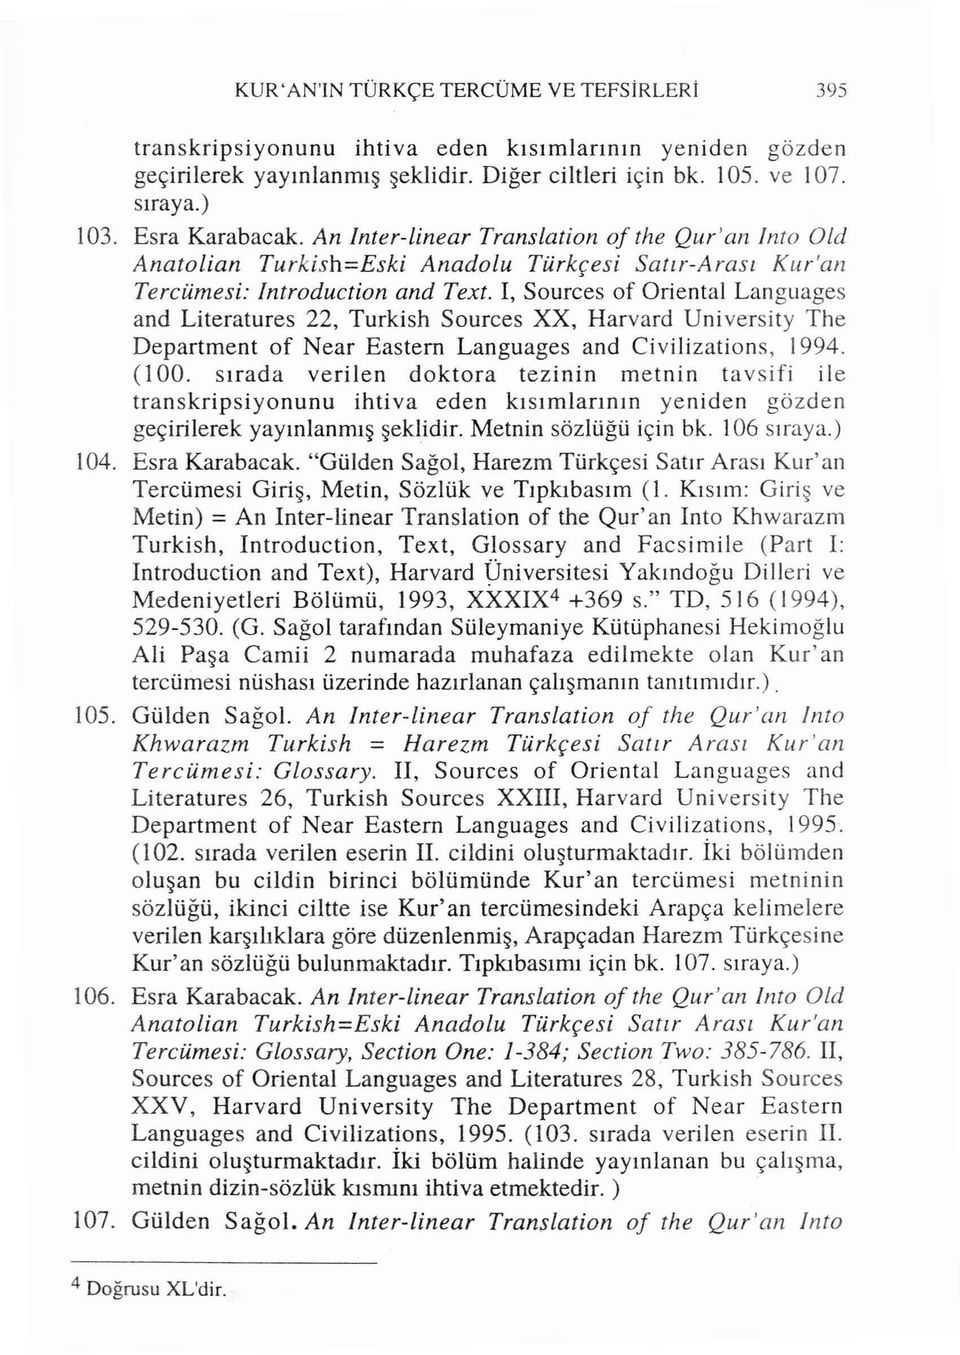 I, Sources of Oriental Languages and Literatures 22, Turkish Sources XX, Harvard University The Department of Near Eastern Languages and Civilizations, 1994. (100.